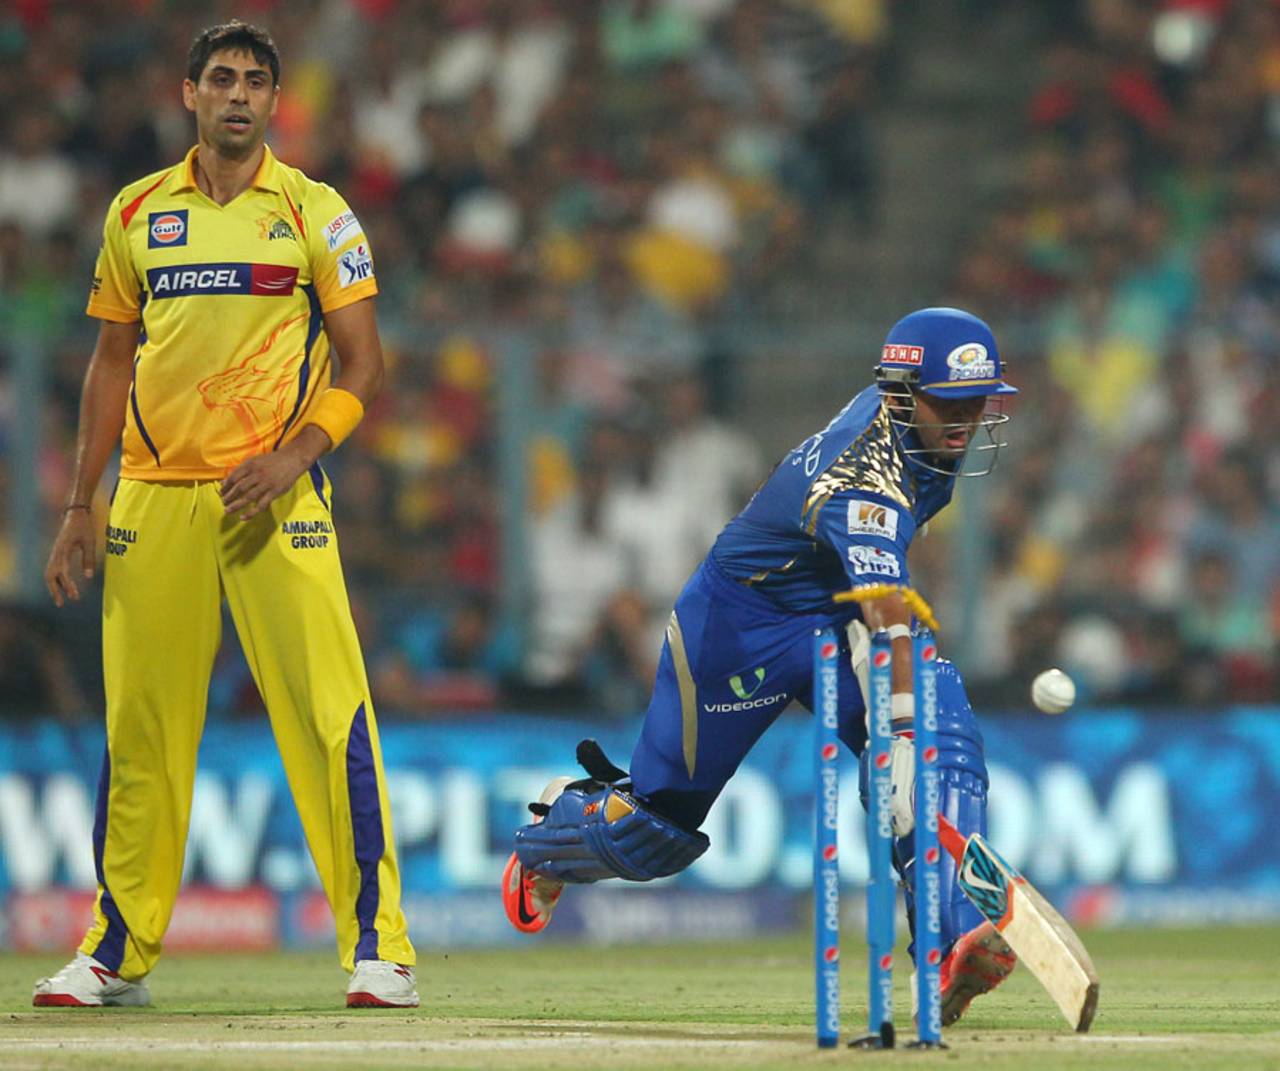 Mumbai Indians did not have the best of starts to their second IPL final in three years. They lost the toss and lost Parthiv Patel in the first over&nbsp;&nbsp;&bull;&nbsp;&nbsp;BCCI